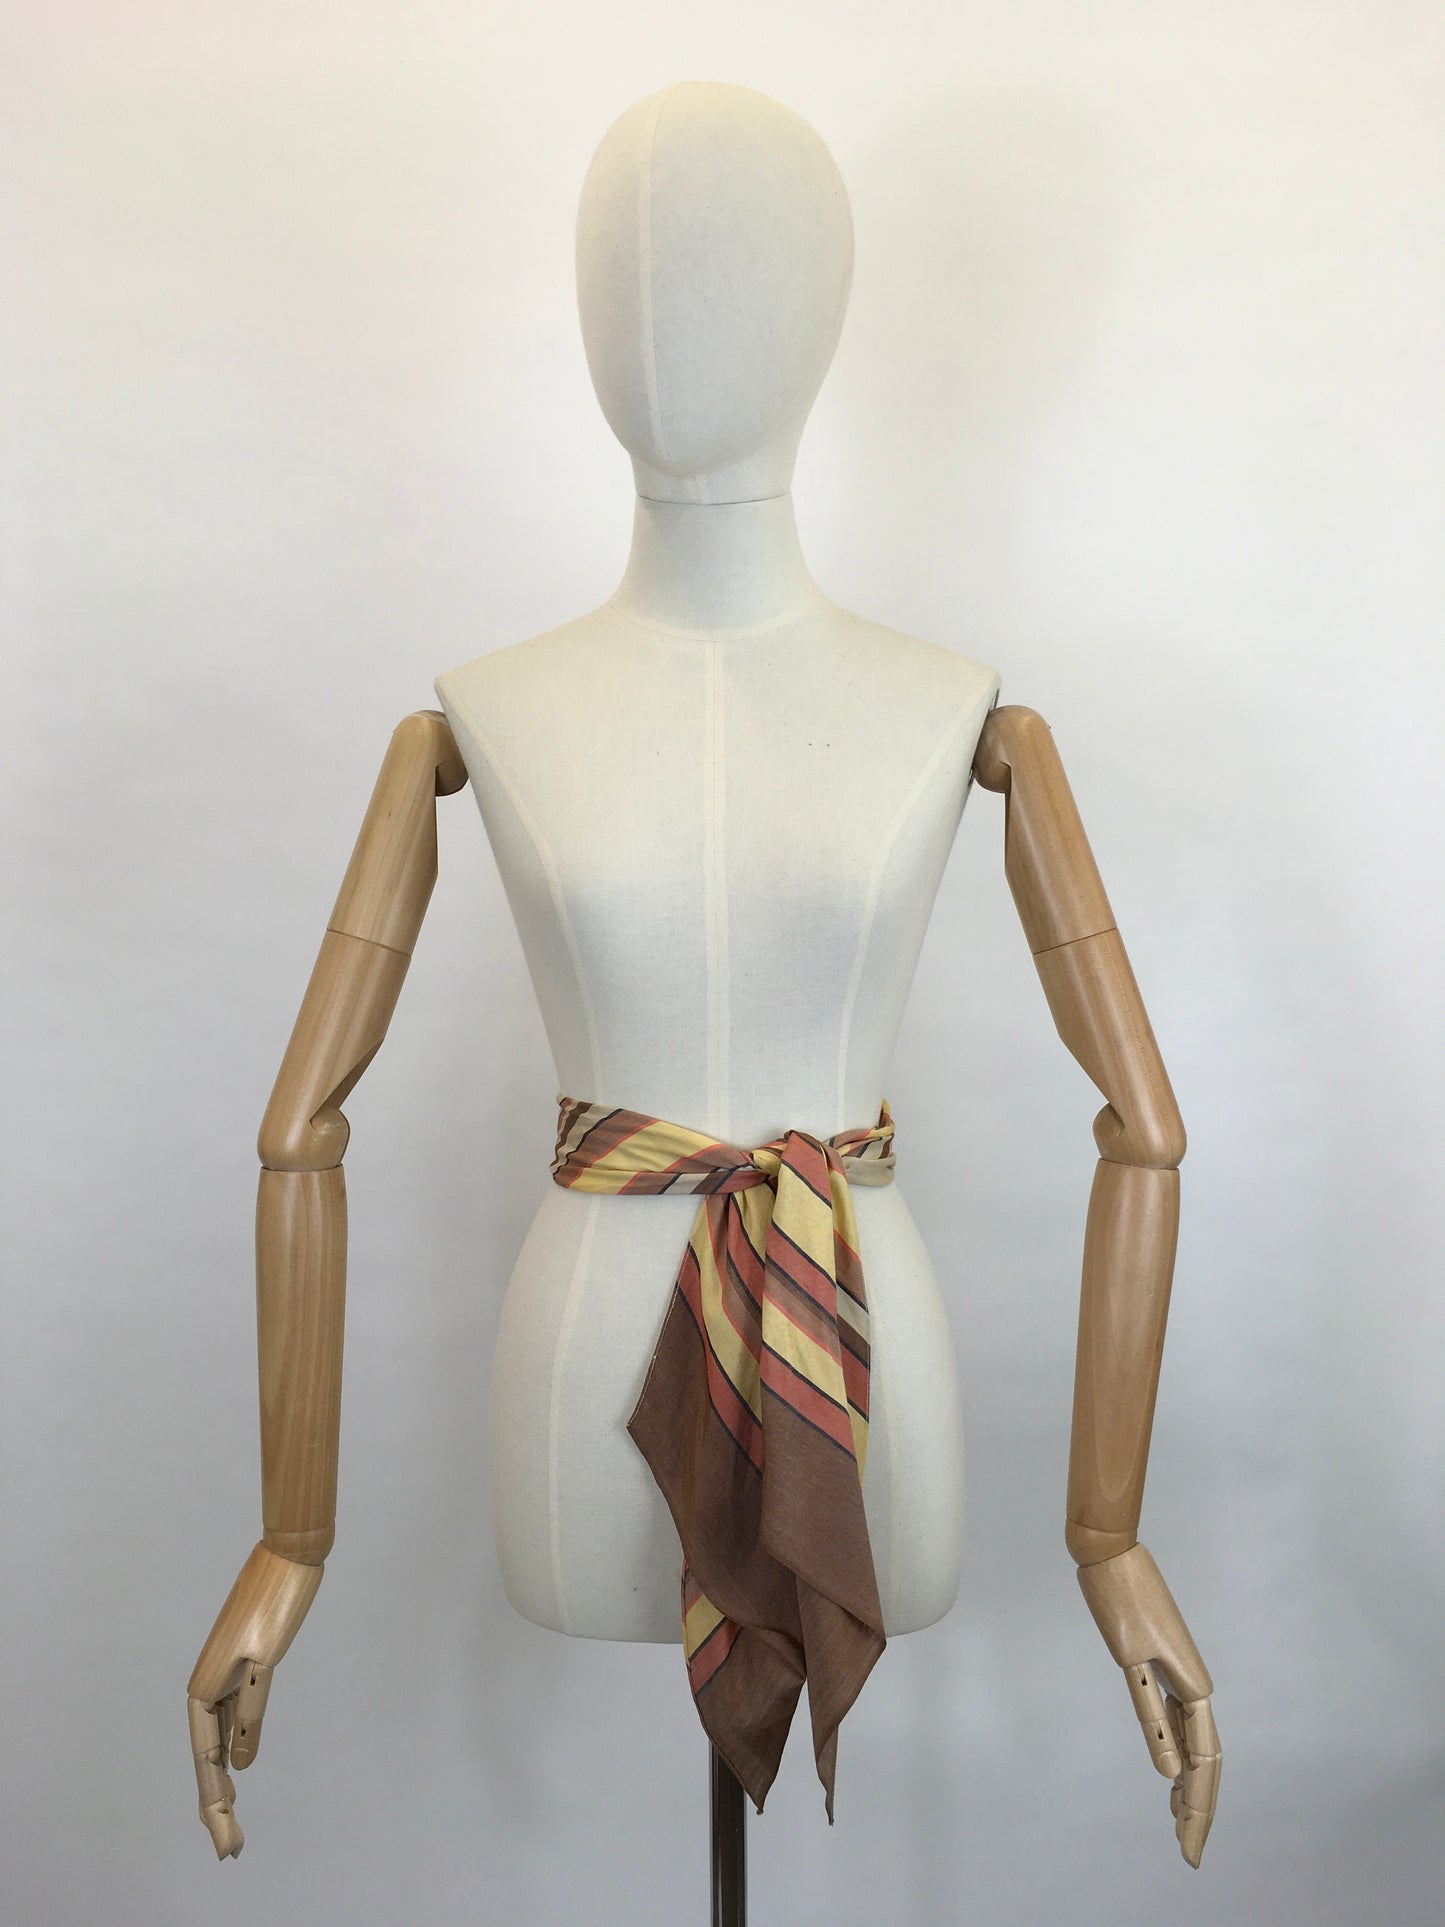 Original 1930’s Deco Pointed Scarf - In Beautiful Warm Browns, Yellows, Burnt Orange and Stencilled Black